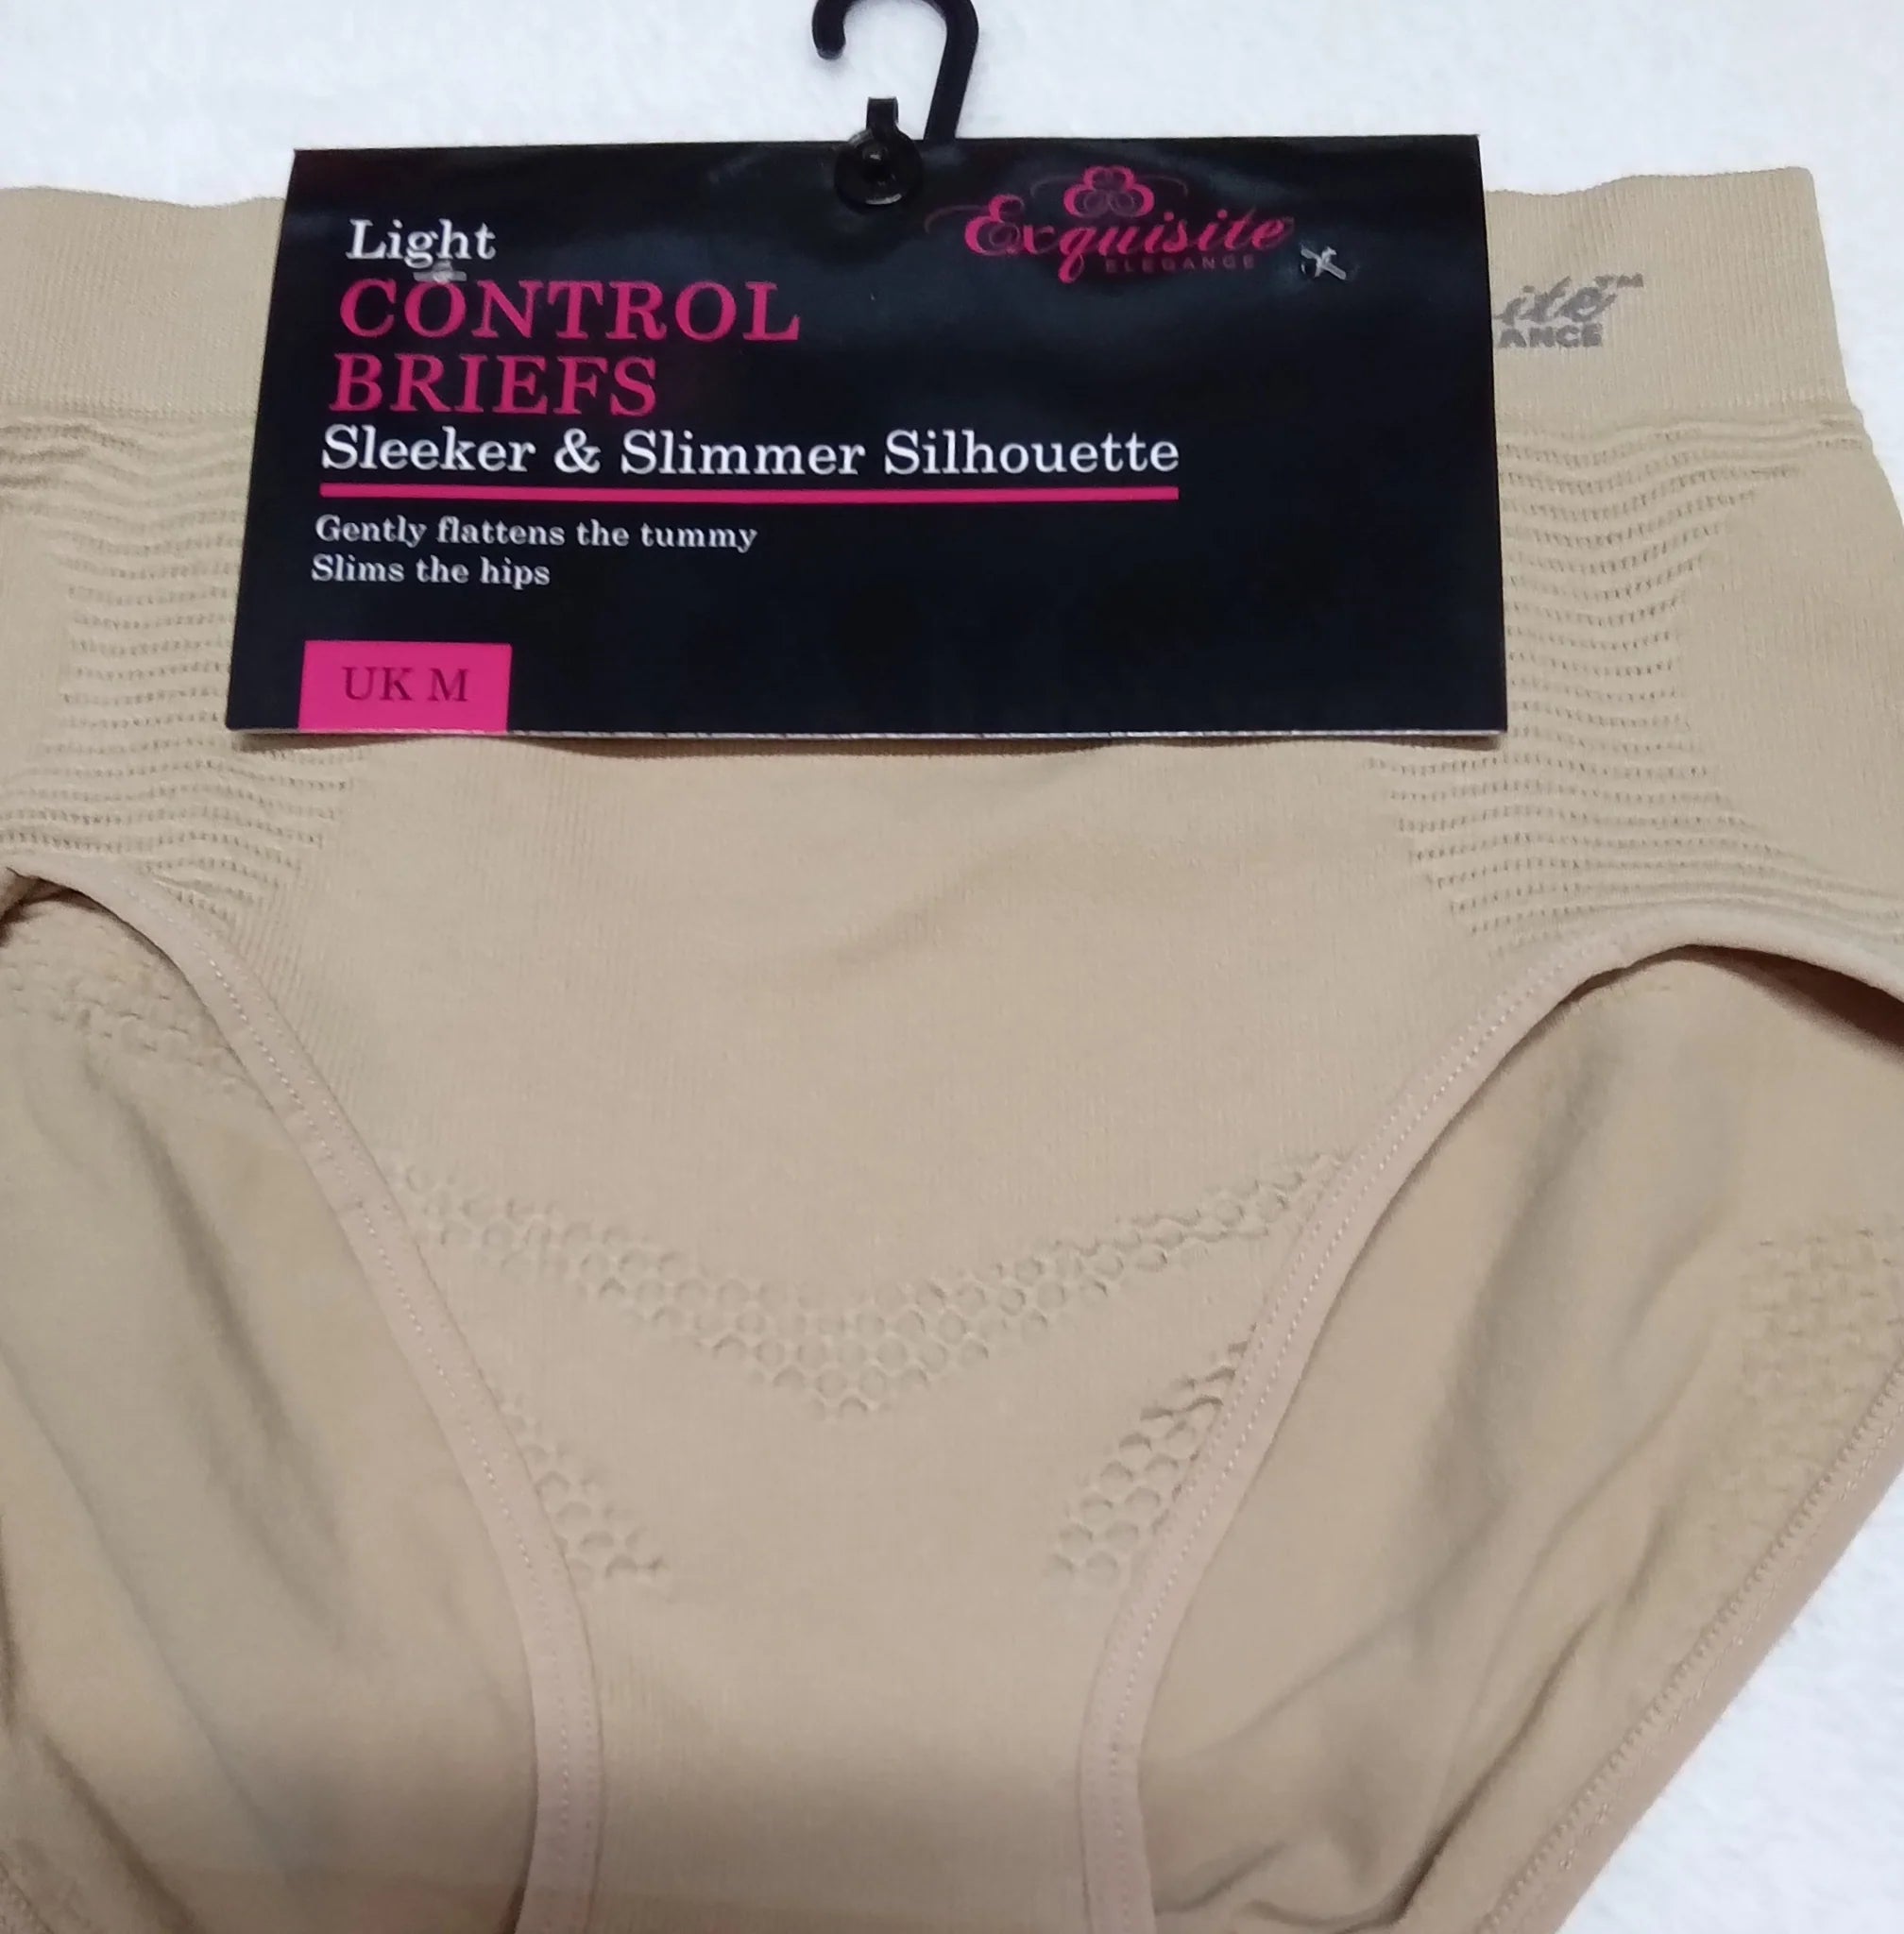 Exquisite Elegance Ladies Seamless Briefs Really Comfy with